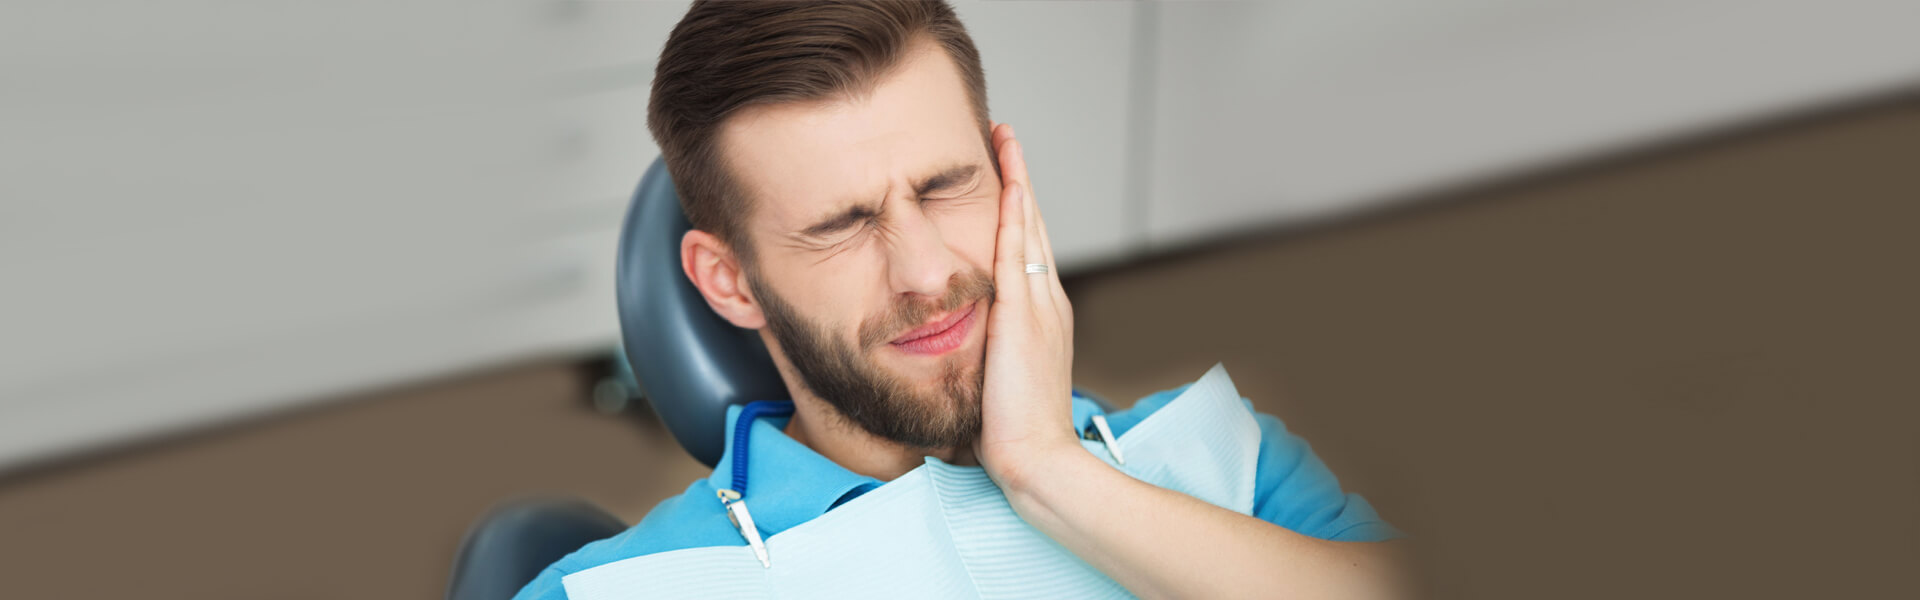 Root Canal Pain: Three Things to Expect